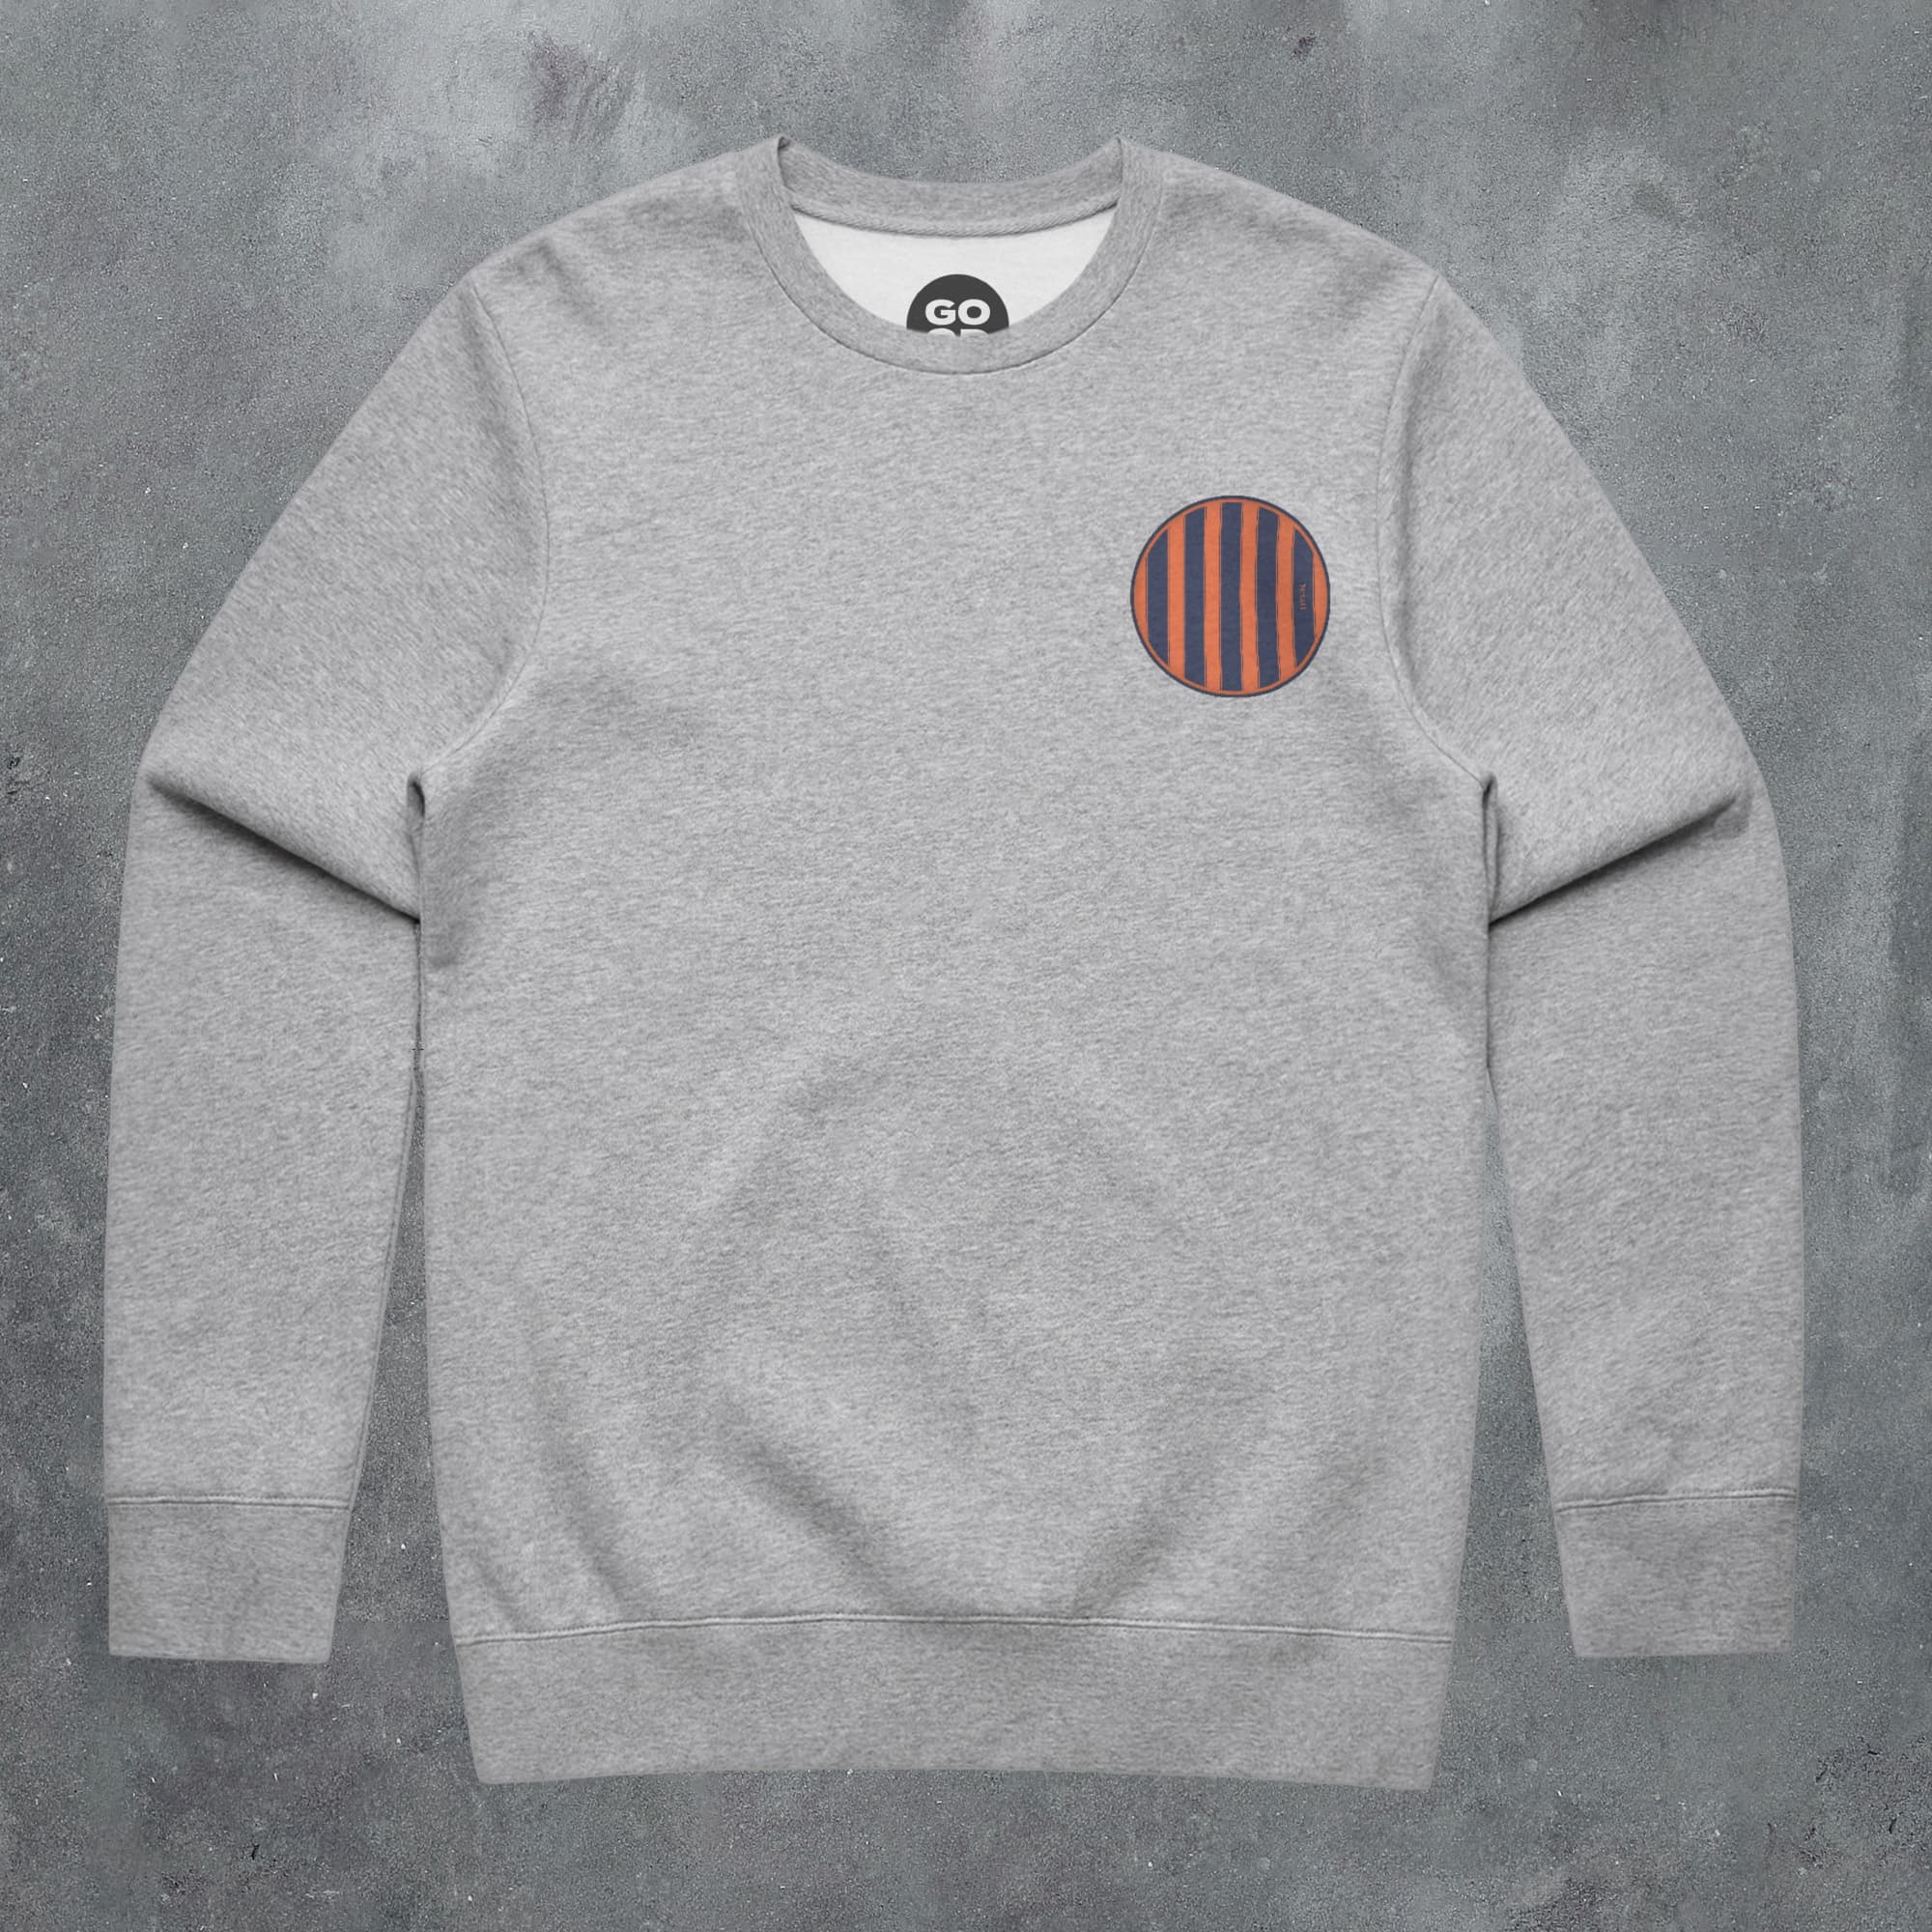 a grey sweatshirt with an orange and black stripe on the chest